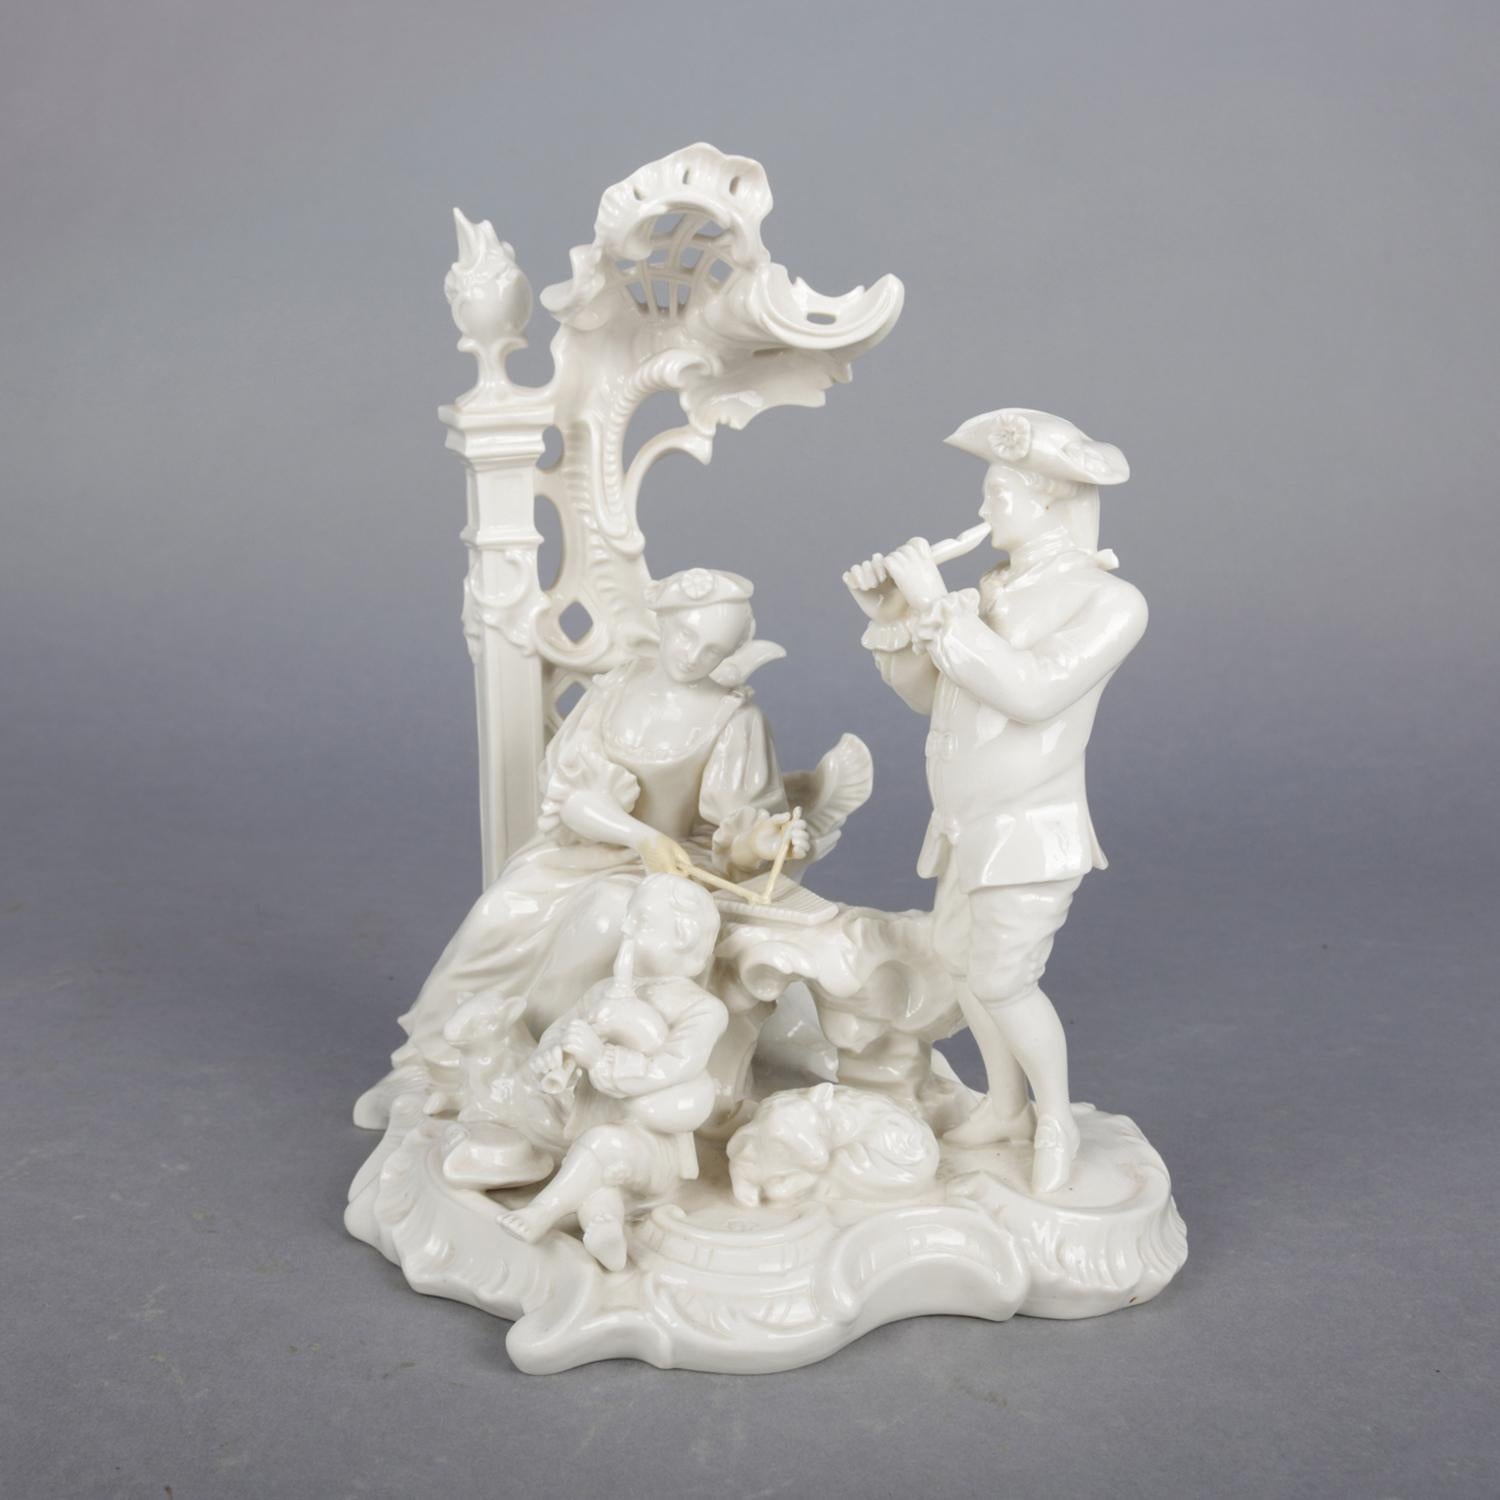 An antique German figural blanc de chine grouping depicts family making music in parlour setting with dog, maker mark on base as photographed, 19th century.

***DELIVERY NOTICE – Due to COVID-19 we are employing NO-CONTACT PRACTICES in the transfer